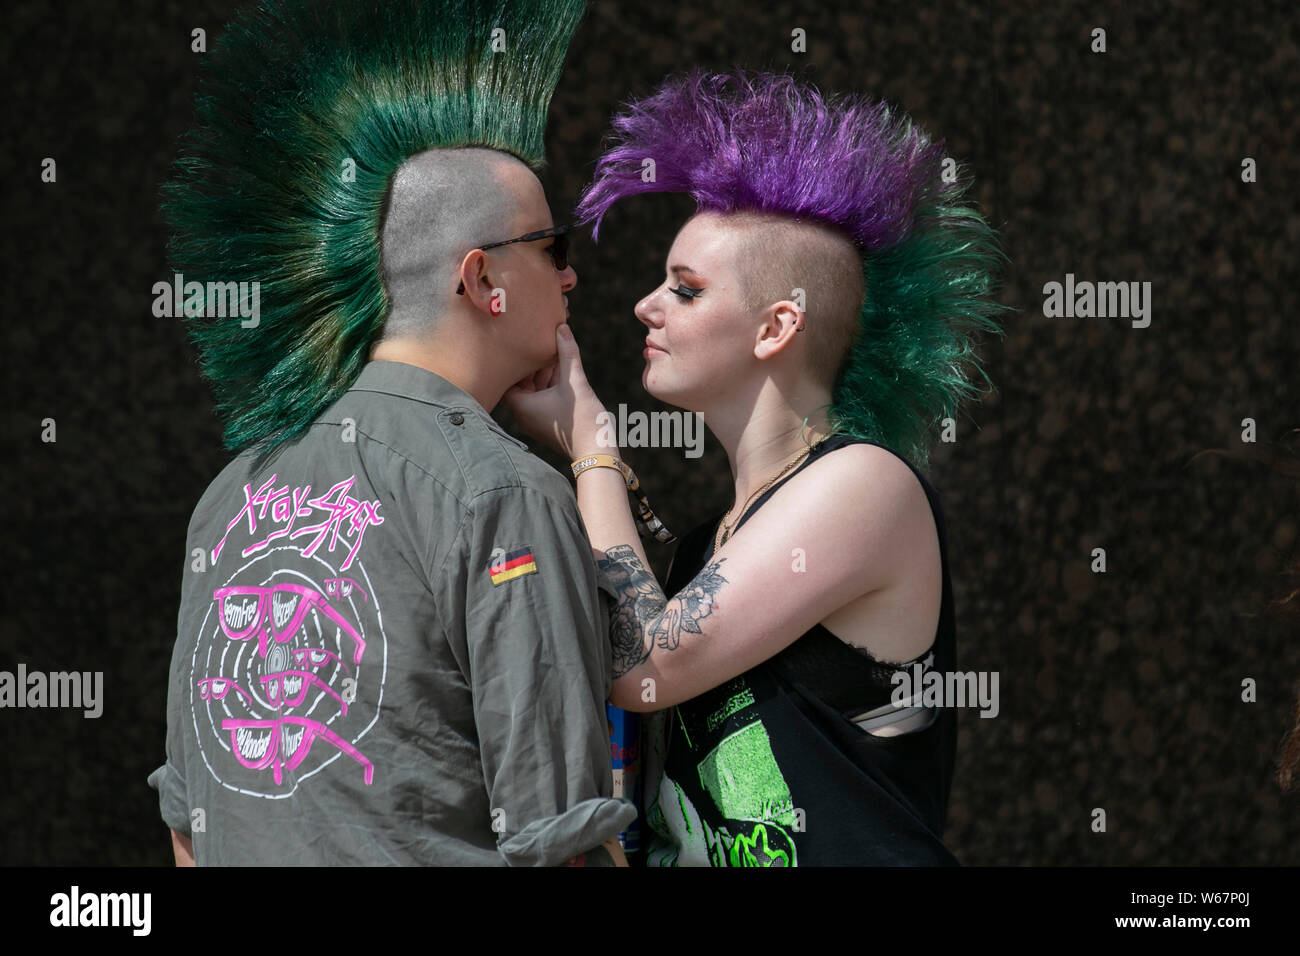 Two punks with Mohican haircut & liberty spikes in Blackpool, Lancashire, UK. 31st July, 2019.  Rebellion Festival world's largest punk festival in Blackpool. At the beginning of August, Blackpool’s Winter Gardens plays host to a massive line up of punk bands for the 21st edition of Rebellion Festival attracting thousands of tourists to the resort.  Over 4 days every August in Blackpool, the very best in Punk gather for this social event of the year with 4 days of music across 6 stages with masses of bands. Credit; MediaWorldImages/Alamy Live News Stock Photo